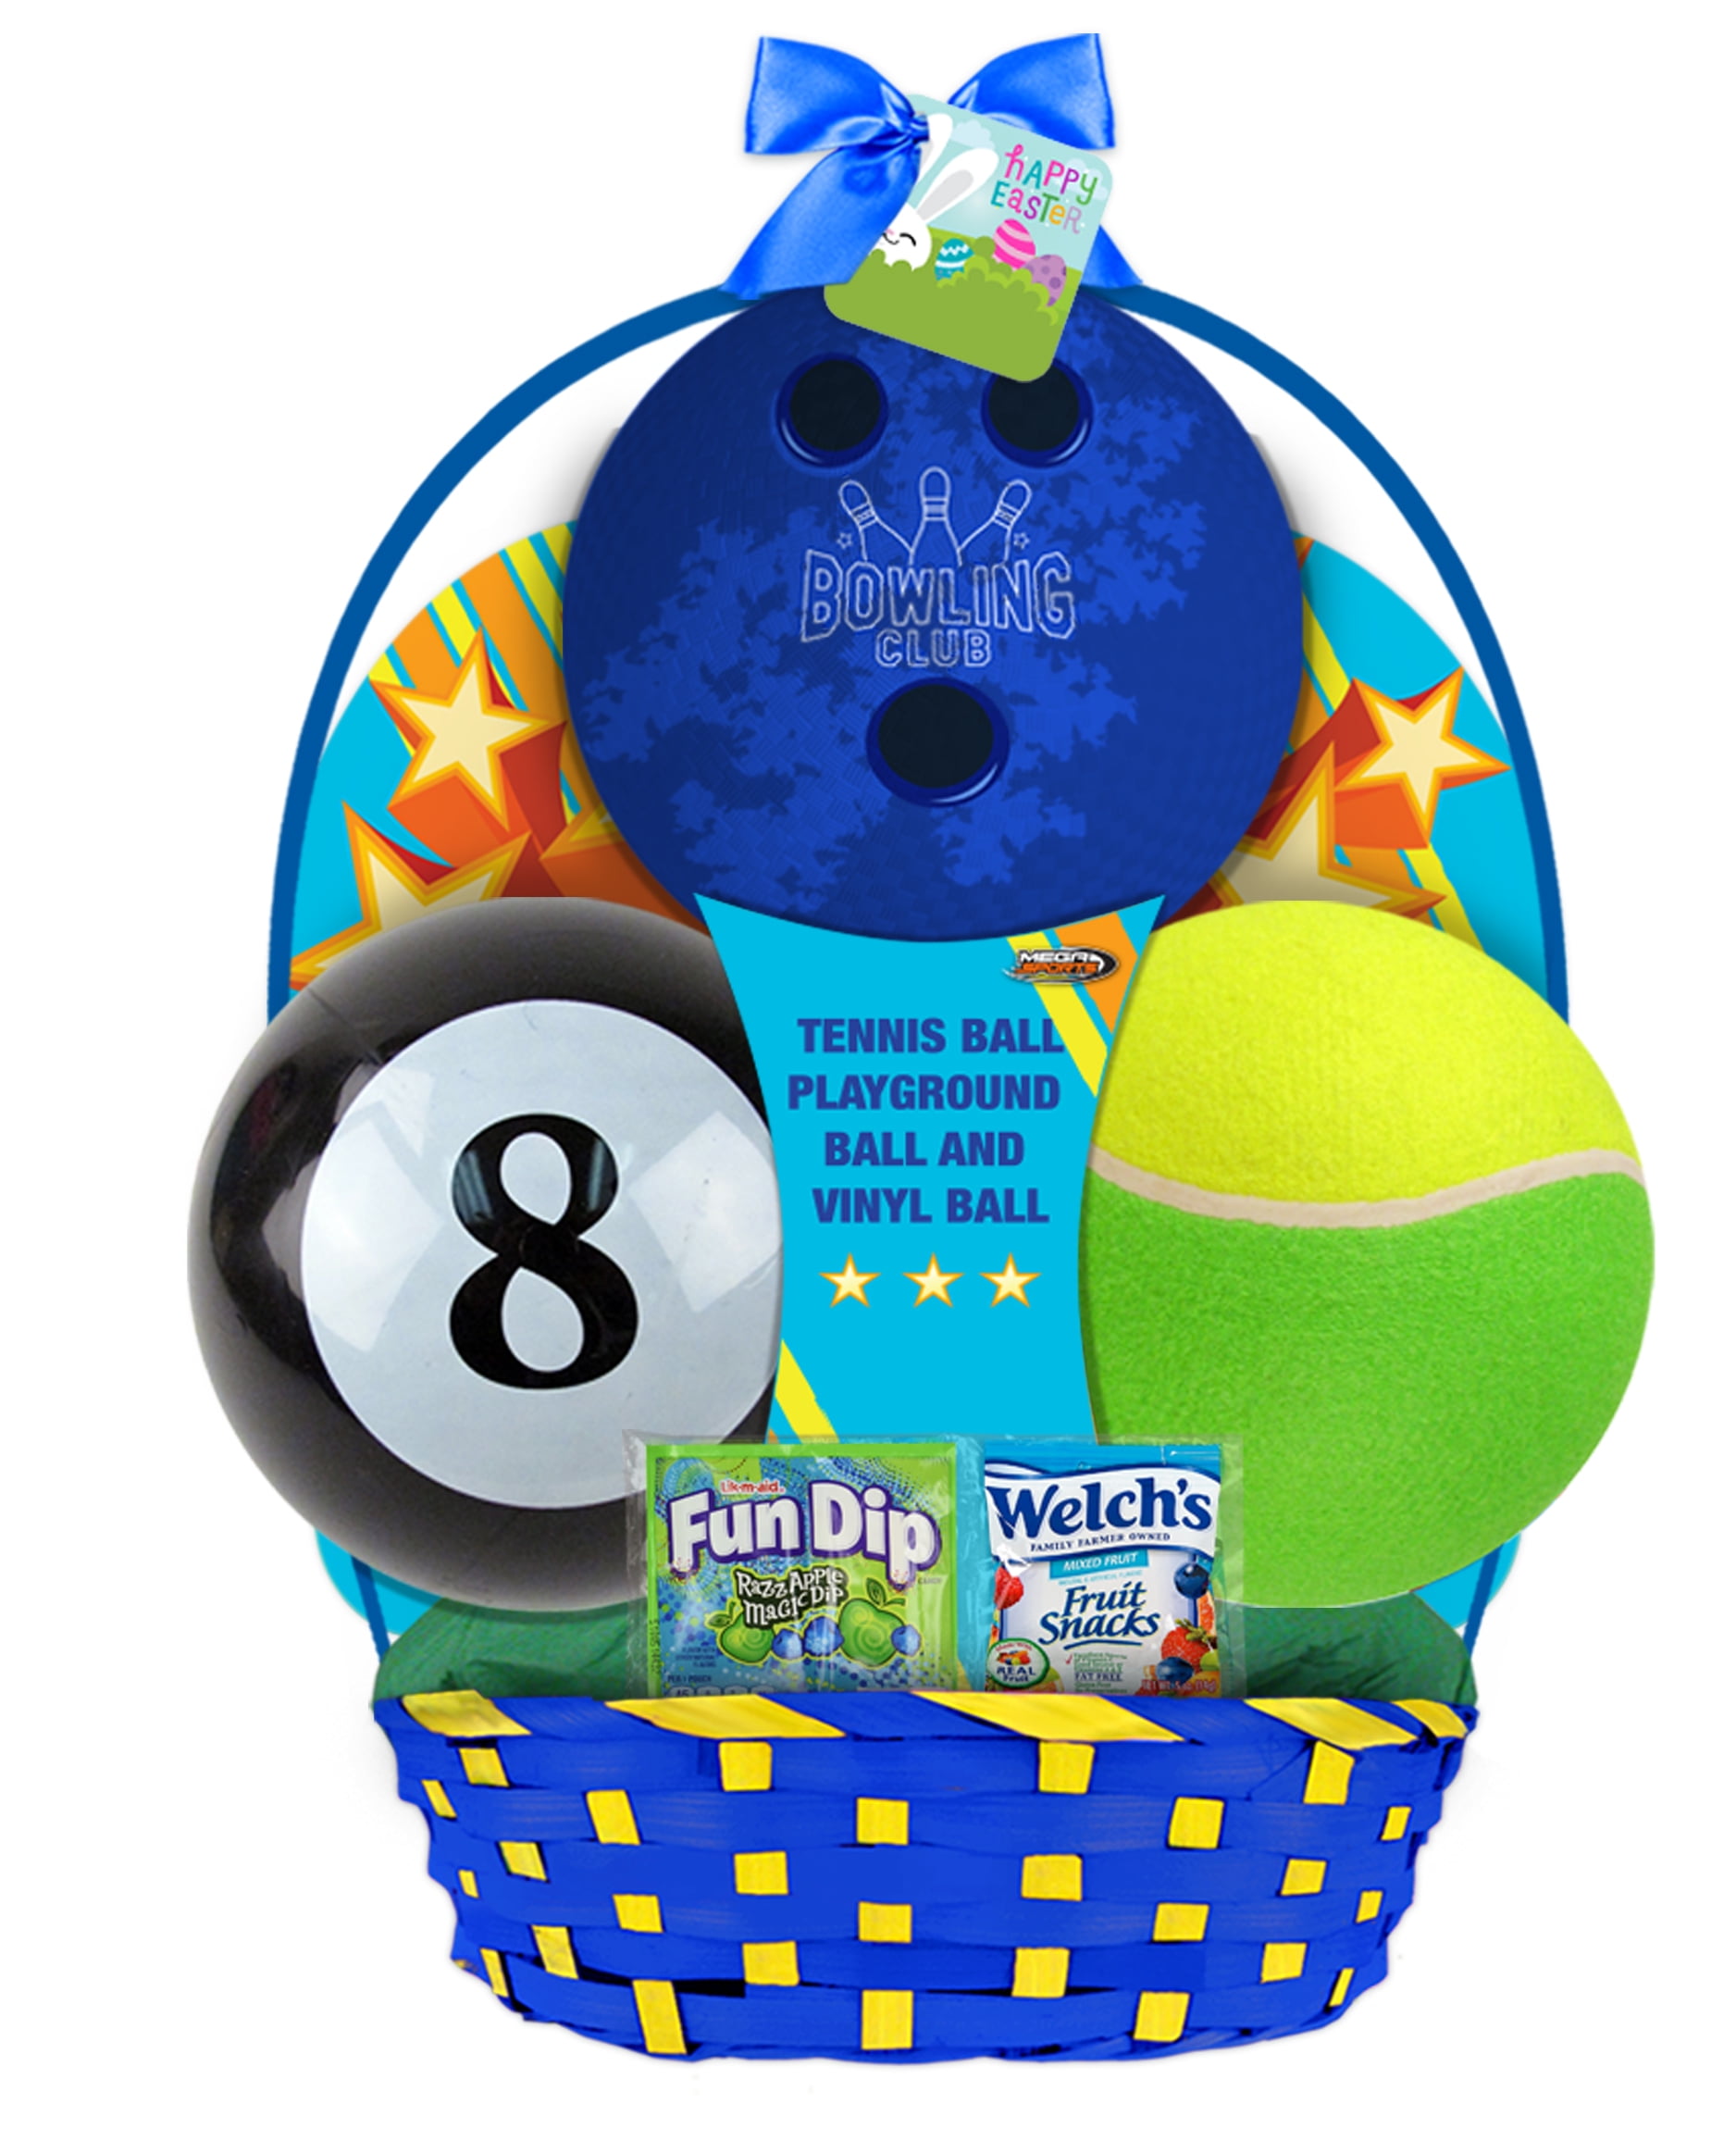 Boys Paw Prefilled and Premade Party Gift Basket Toy Favor Set for Kids Generic